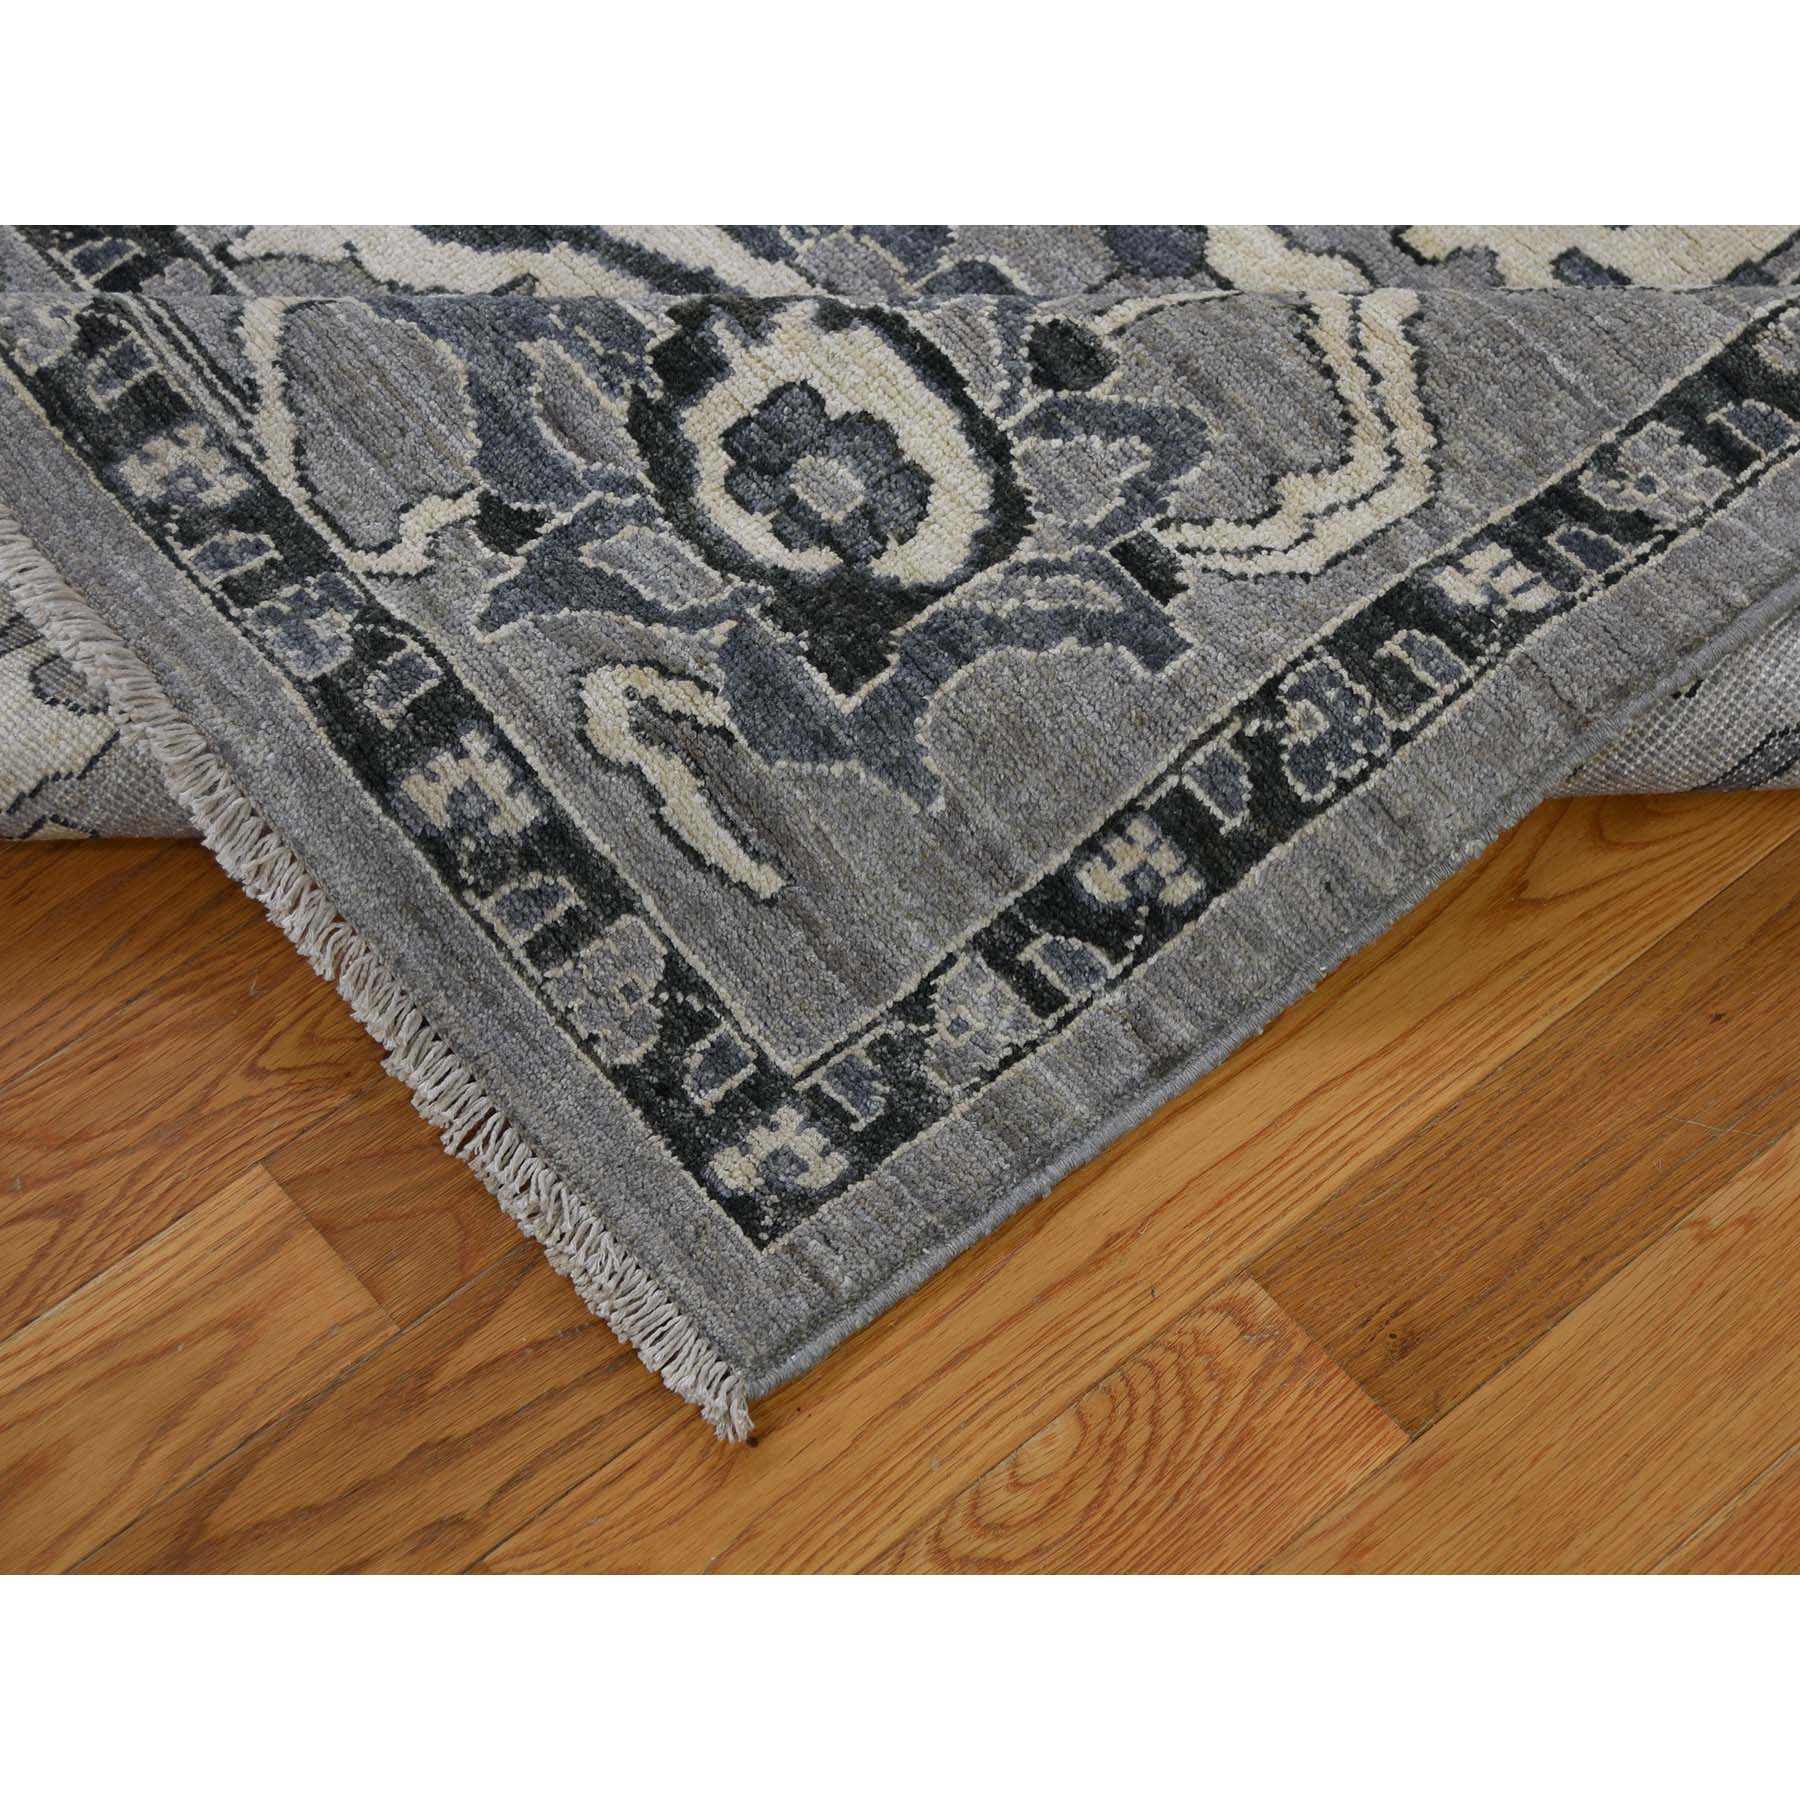 8-2 x9-10  Mahal Design Undyed Natural Wool Hand-Knotted Oriental Rug 